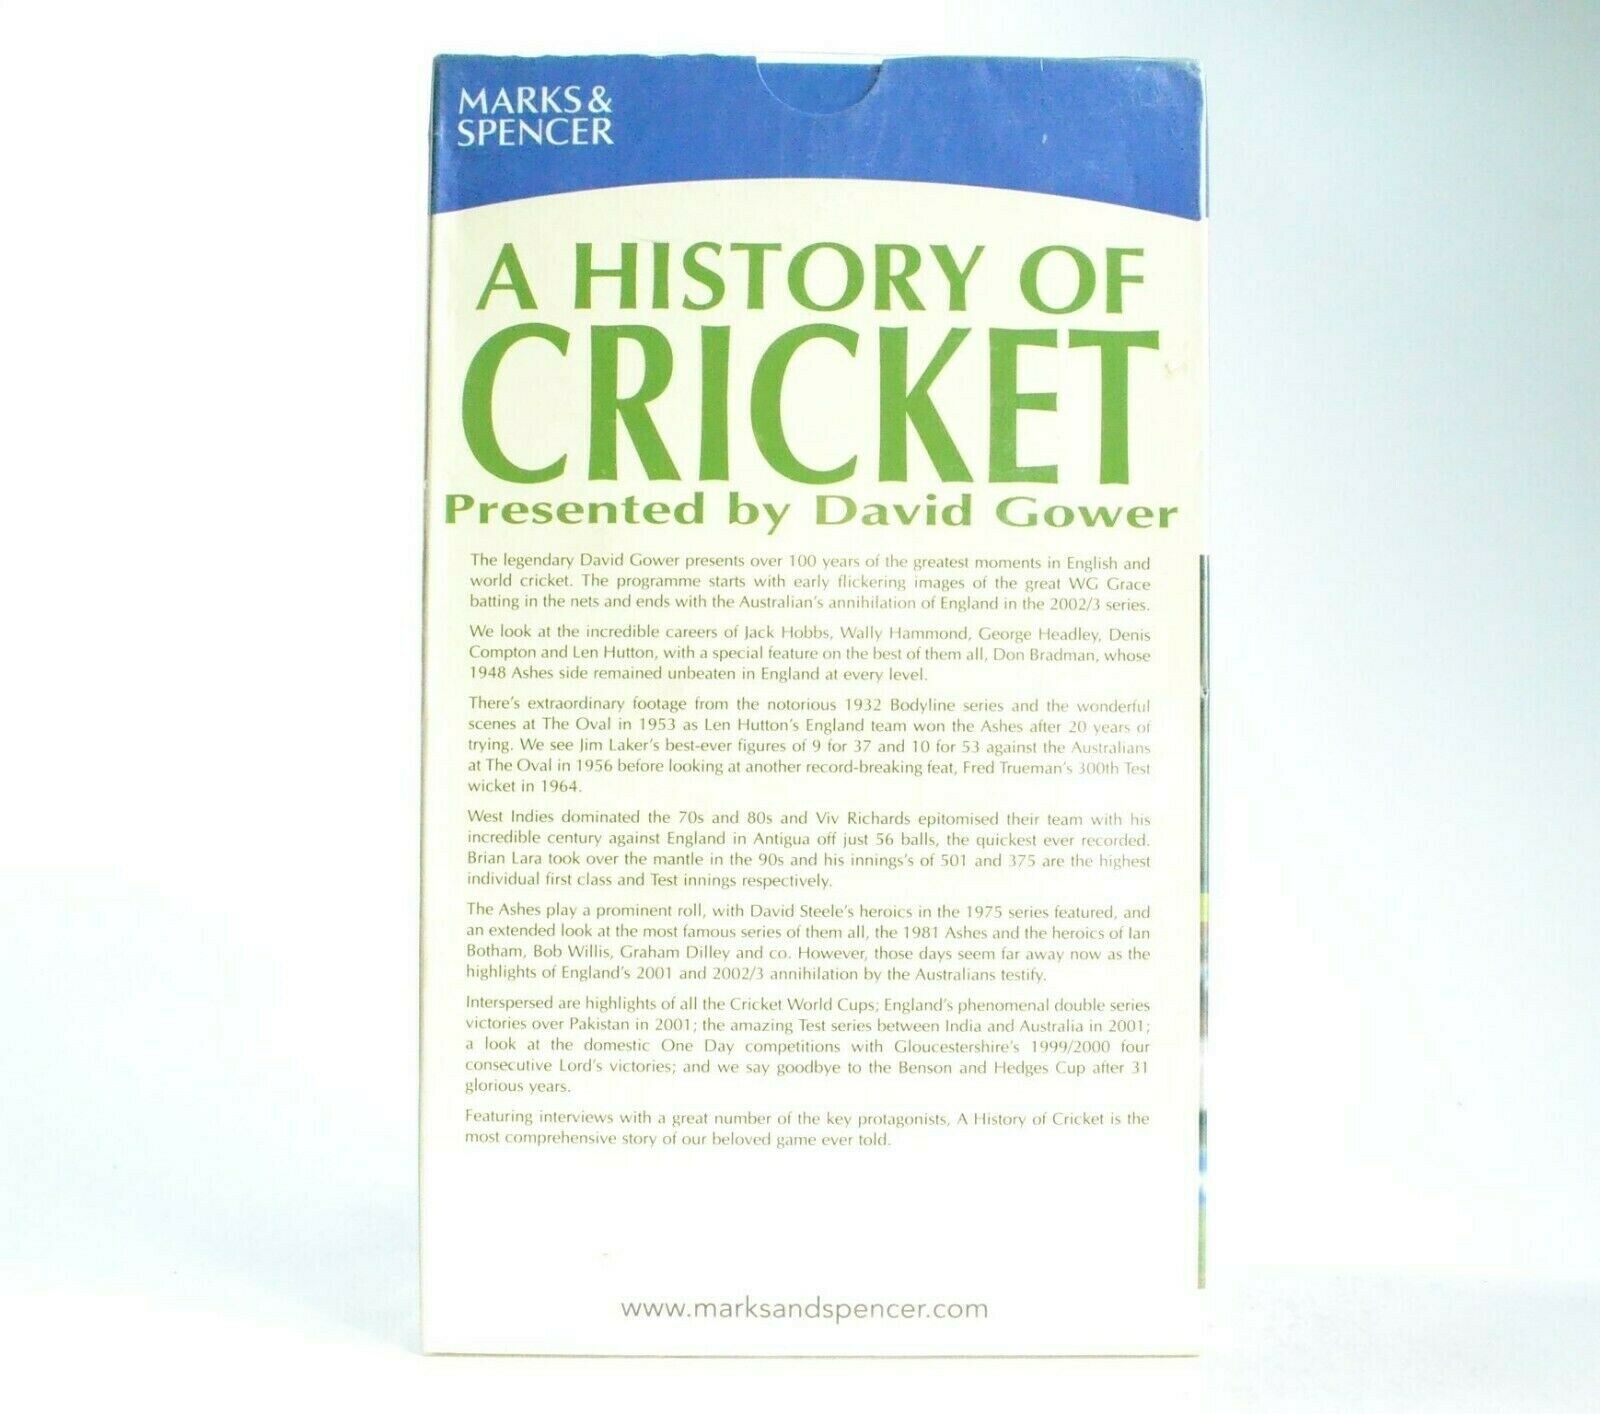 A History Of Cricket - Marks And Spencer - David Gower - Highlights NEW - VHS-